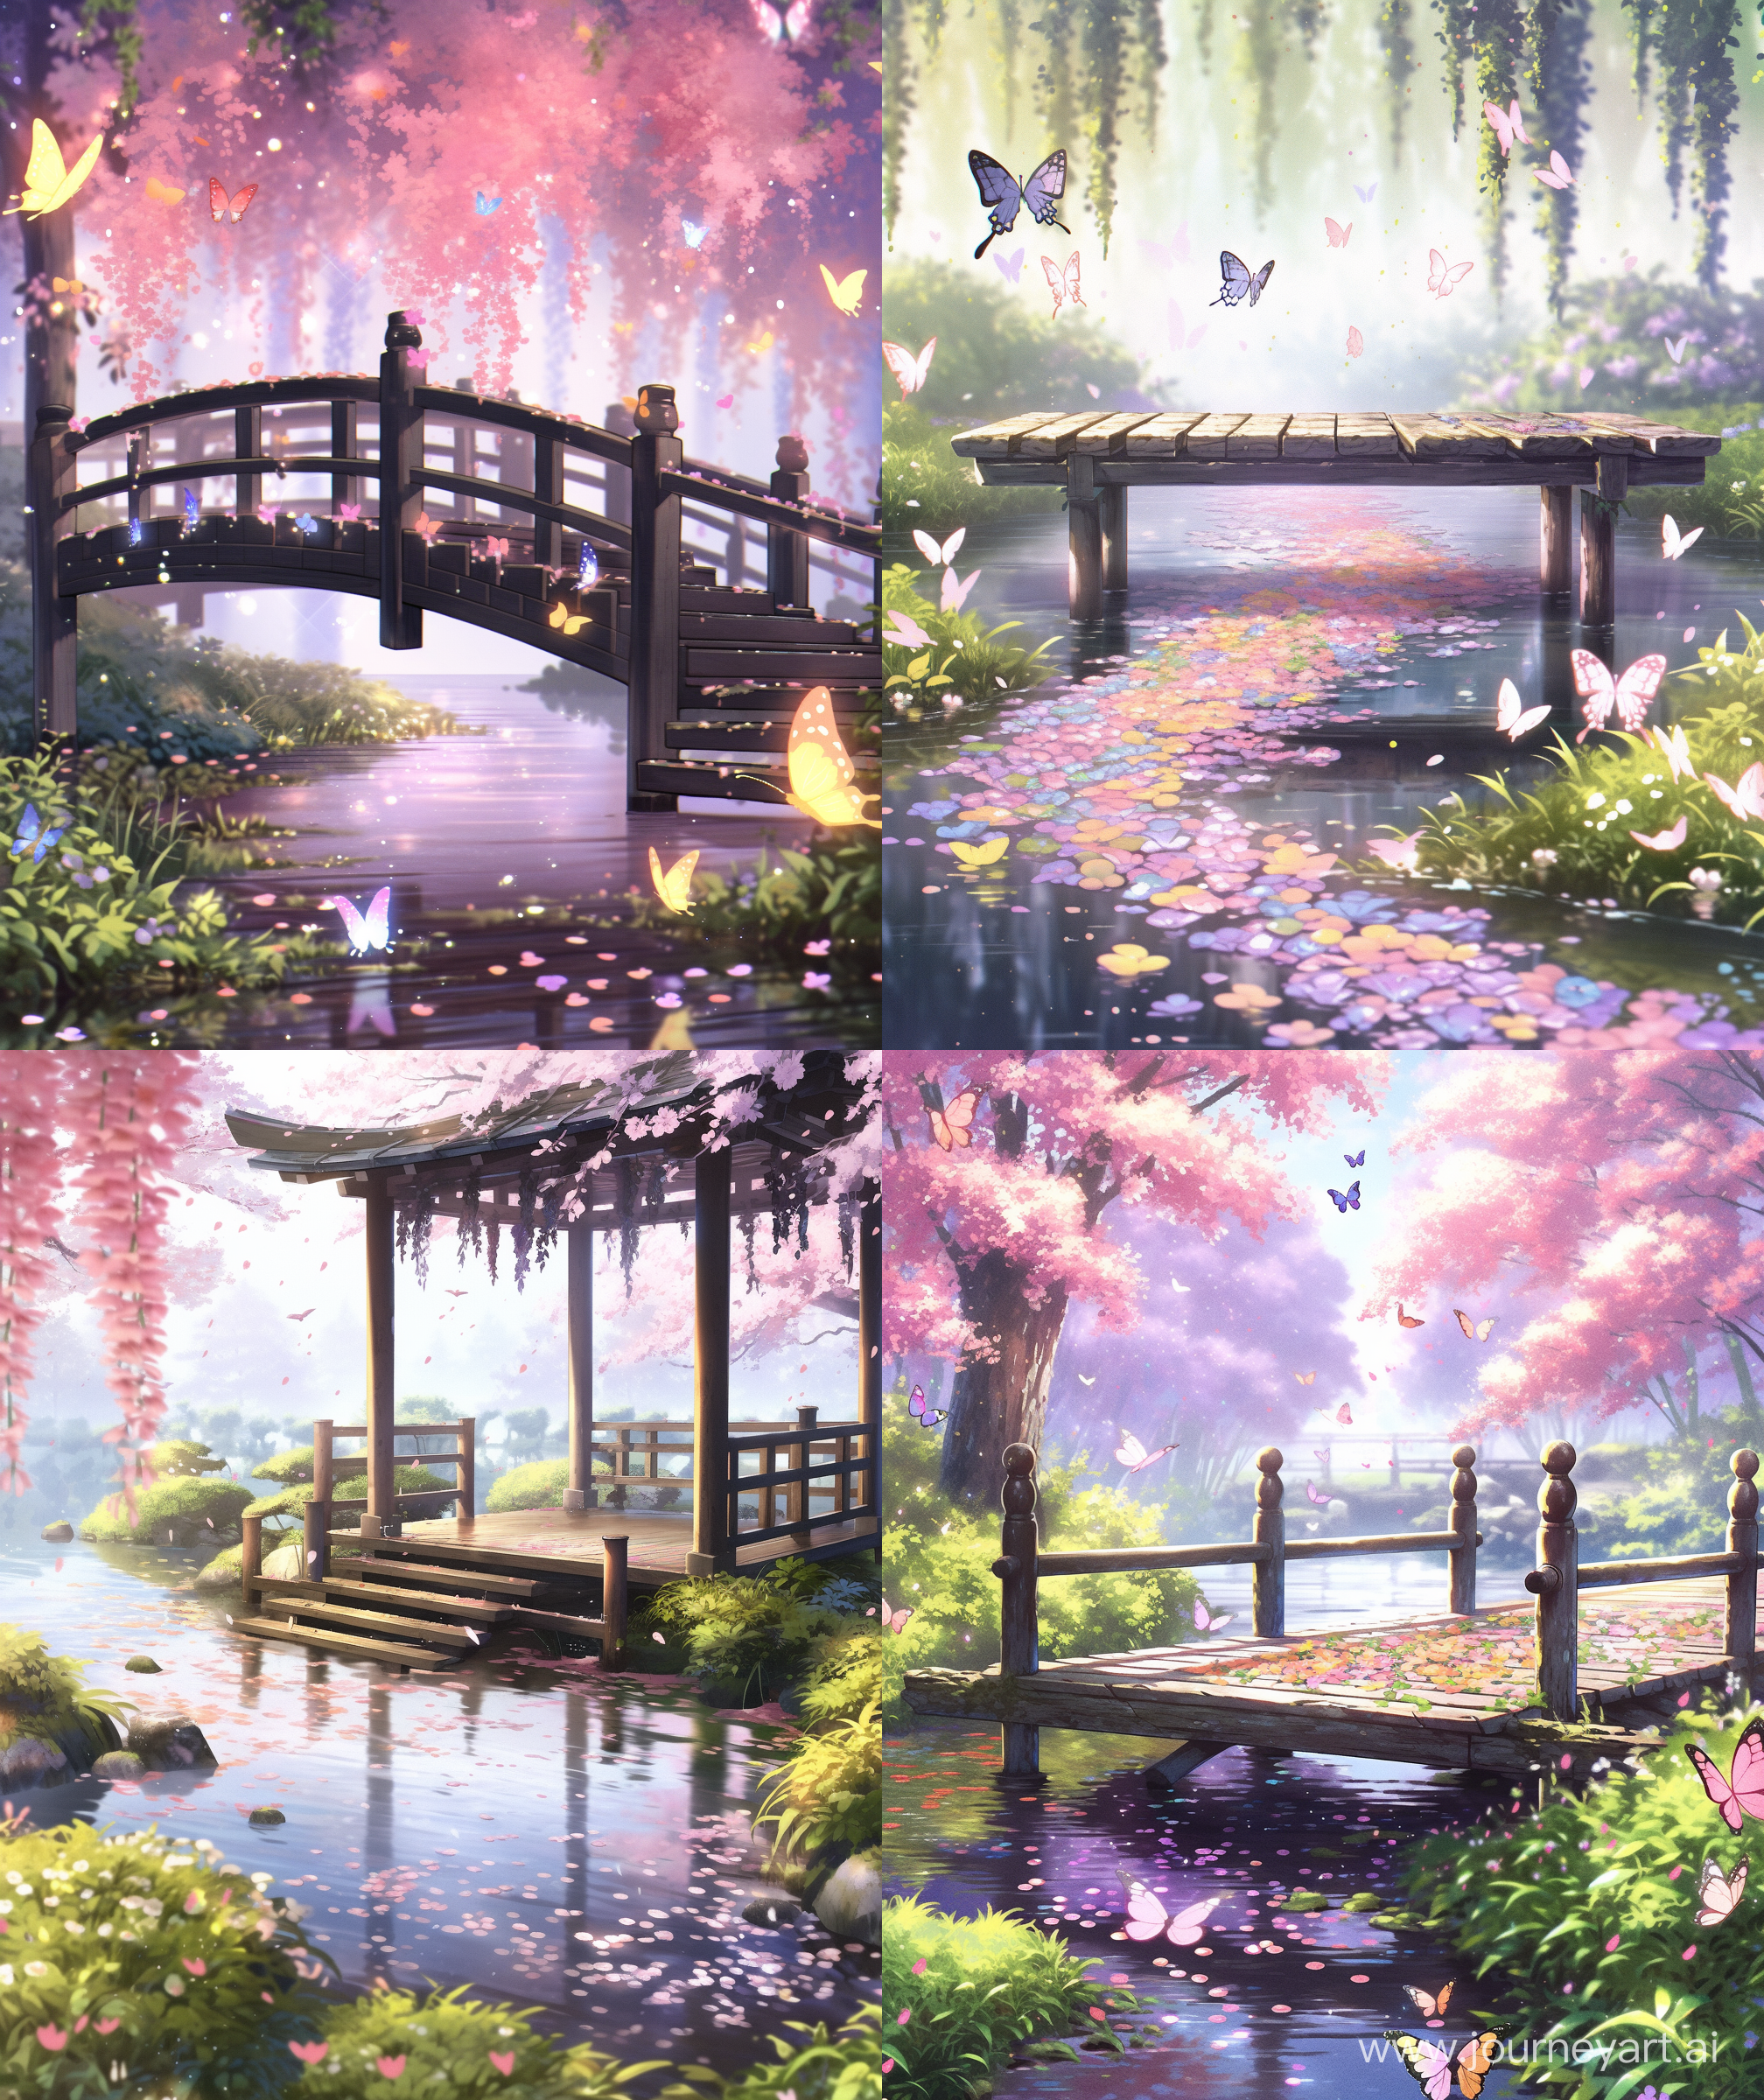 Mokoto shinkai style Peaceful pond, colorful petals, lily pad, wooden wet pier, white wisteria flower tree, flower beside pond, glistening sunlight over pond, many small and big pink and red lotus, colorful spring time colorful tree, butterfly, ultra hd, High quality, anime style, , --ar 27:32 --niji 5 